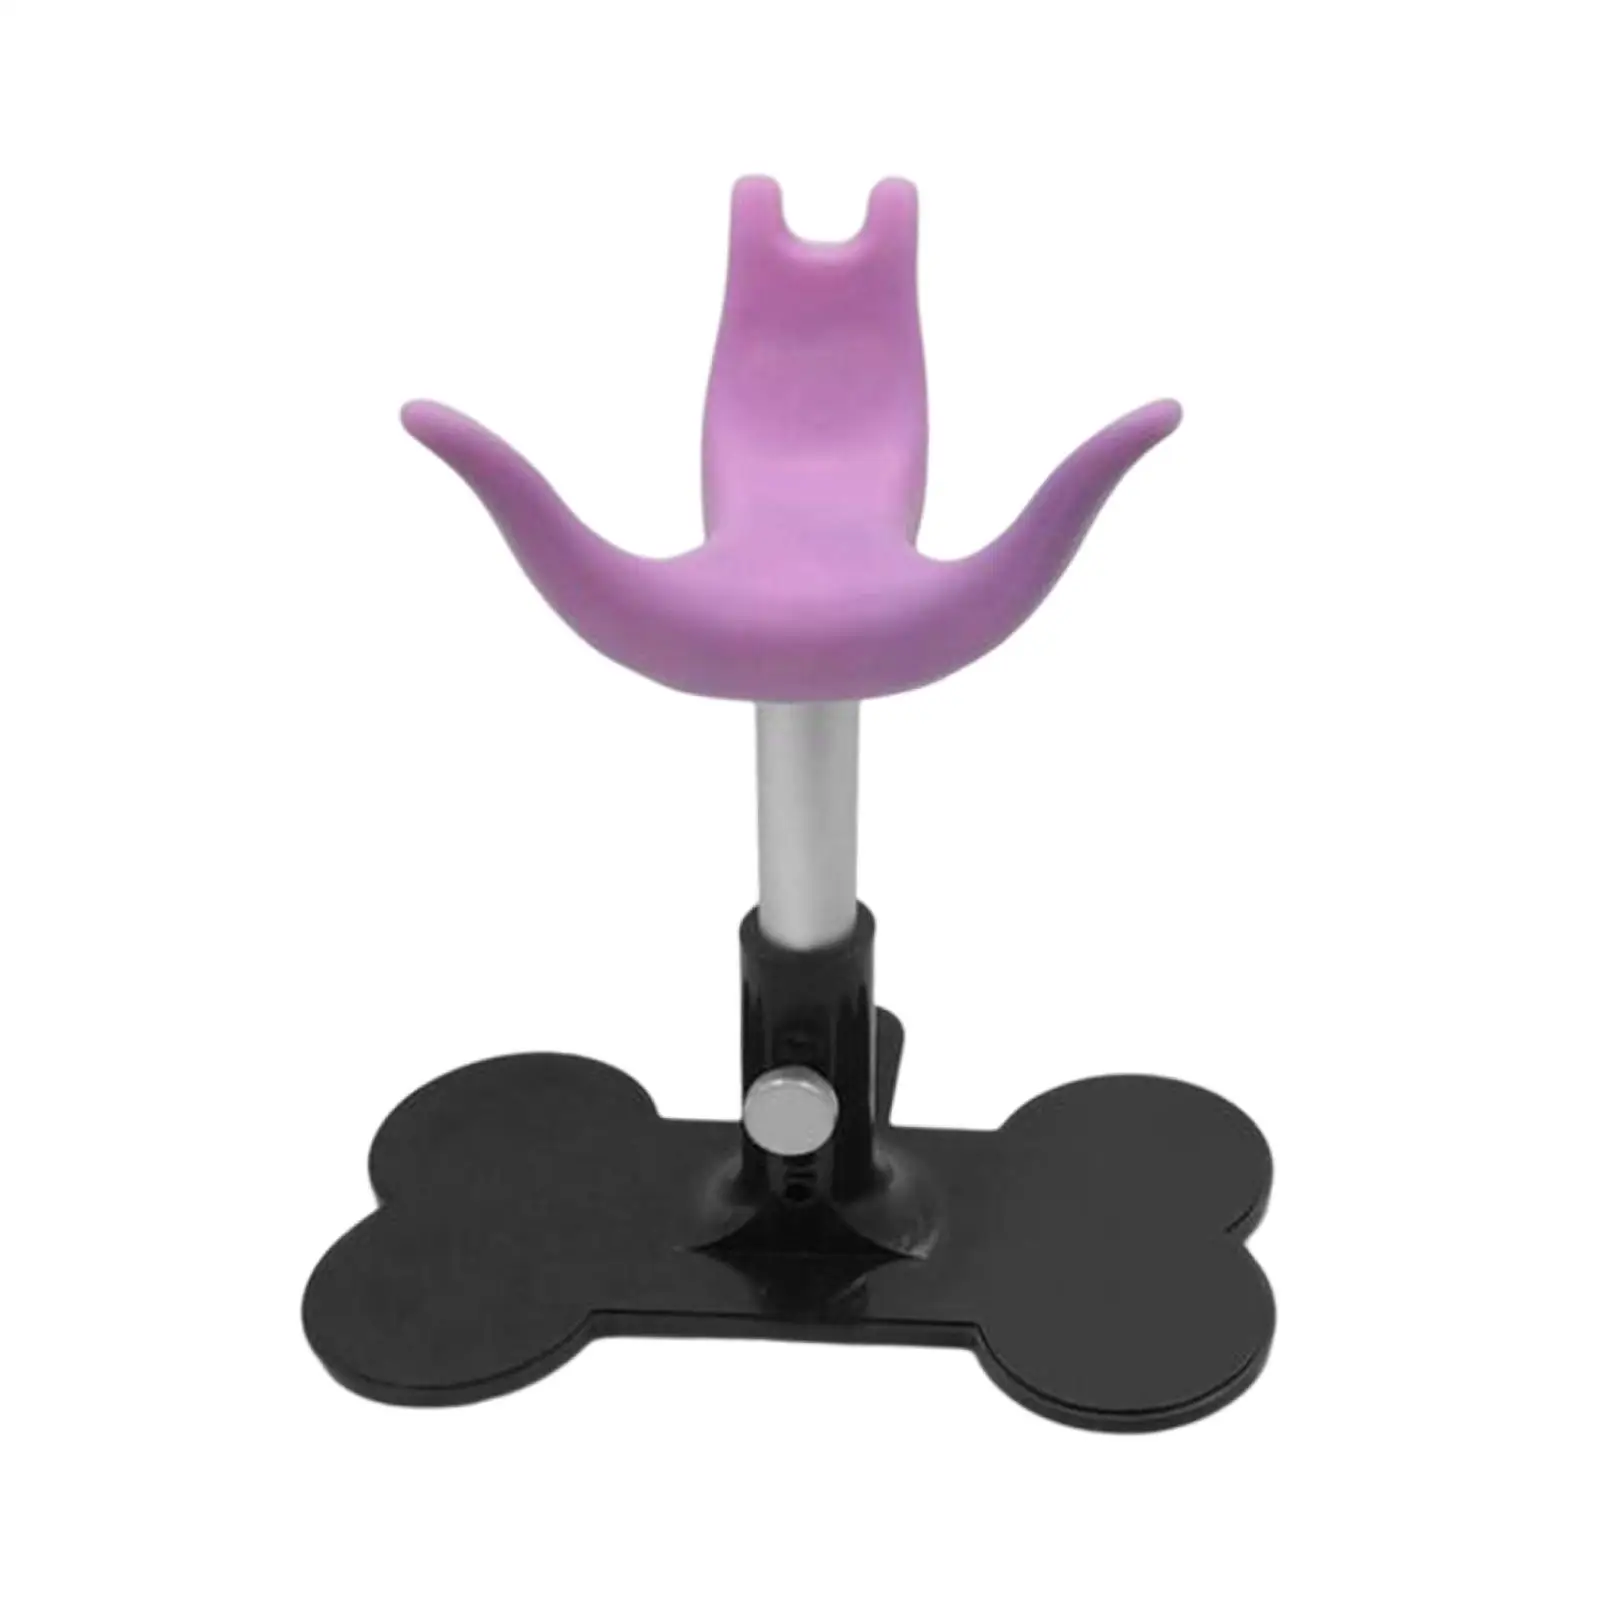 Dog Assisted Standing Support Soft Pet Dog Gift Environmentally Friendly Height Adjustable for Pet Grooming Cleaning Bathing